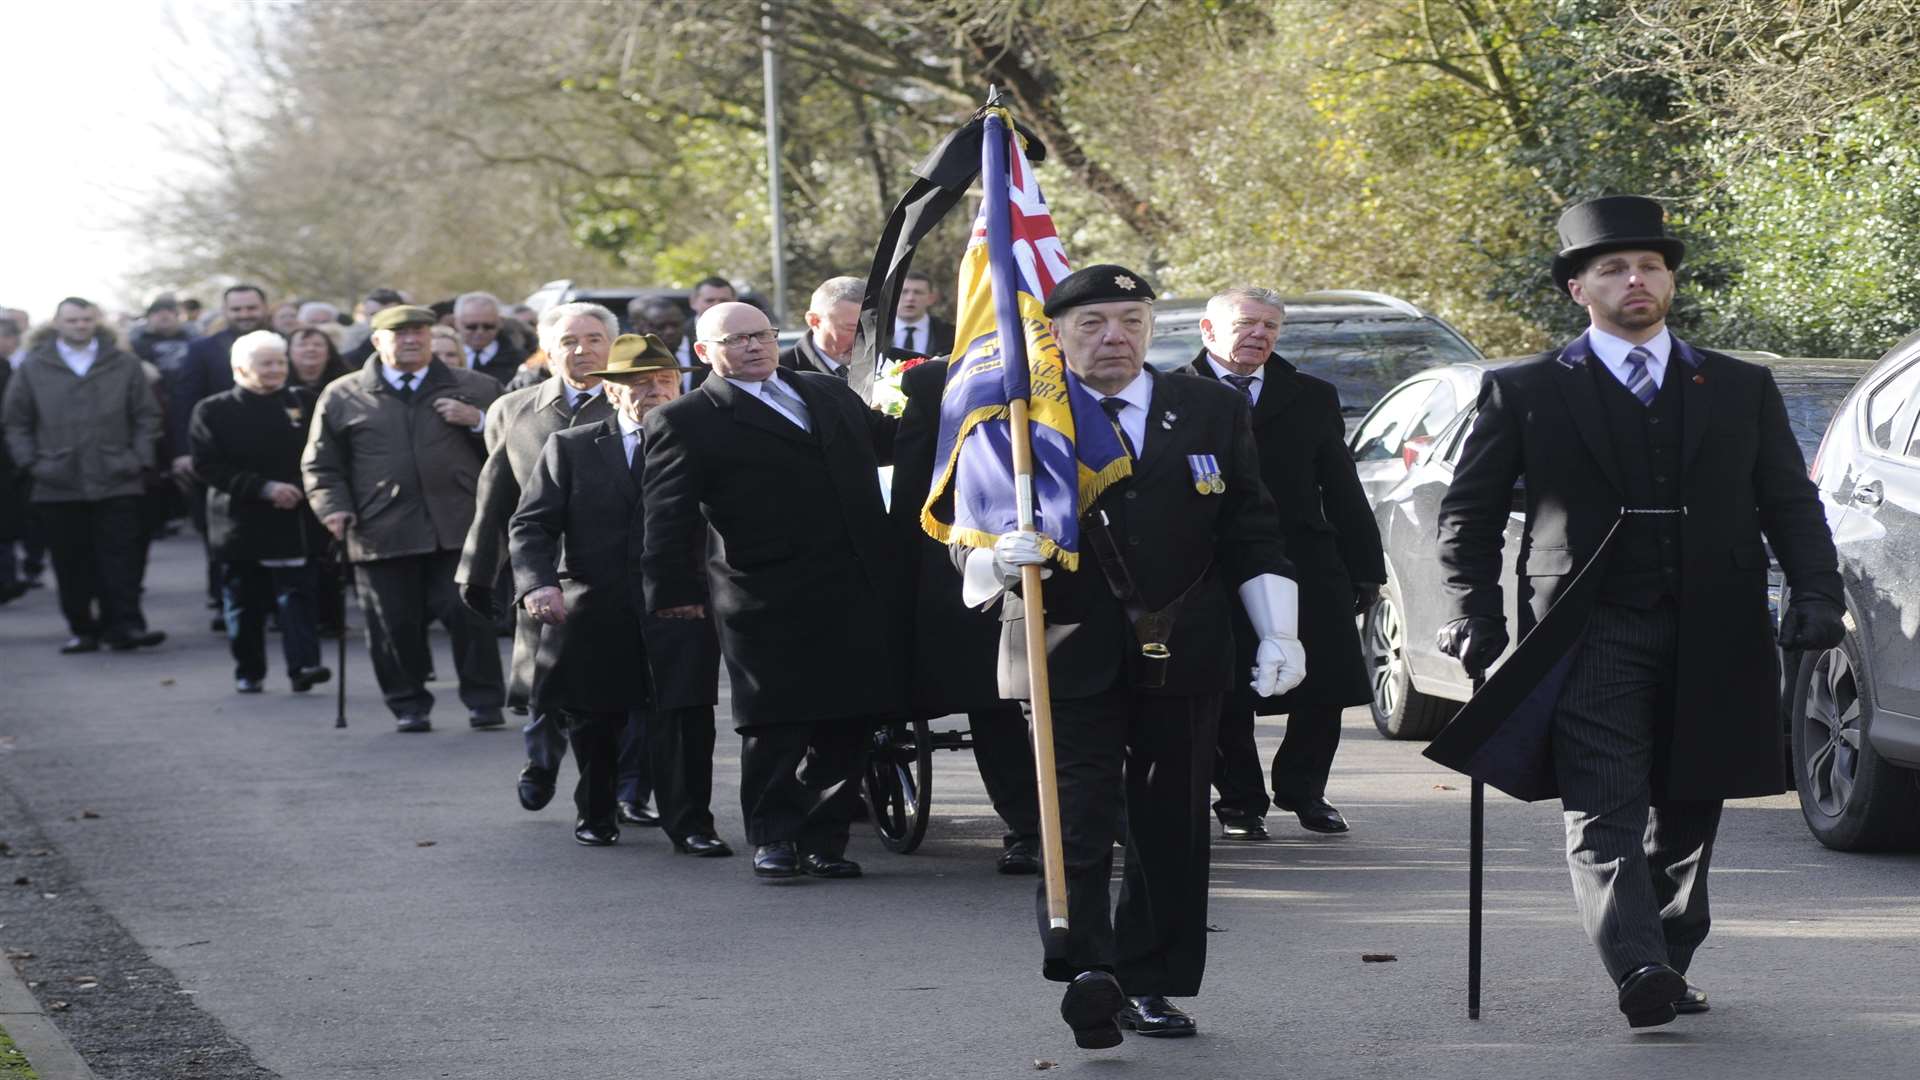 Funeral of 96 year old Dunkirk veteran Eric Rooke Procession from the Red Lion to St Paul's Church.